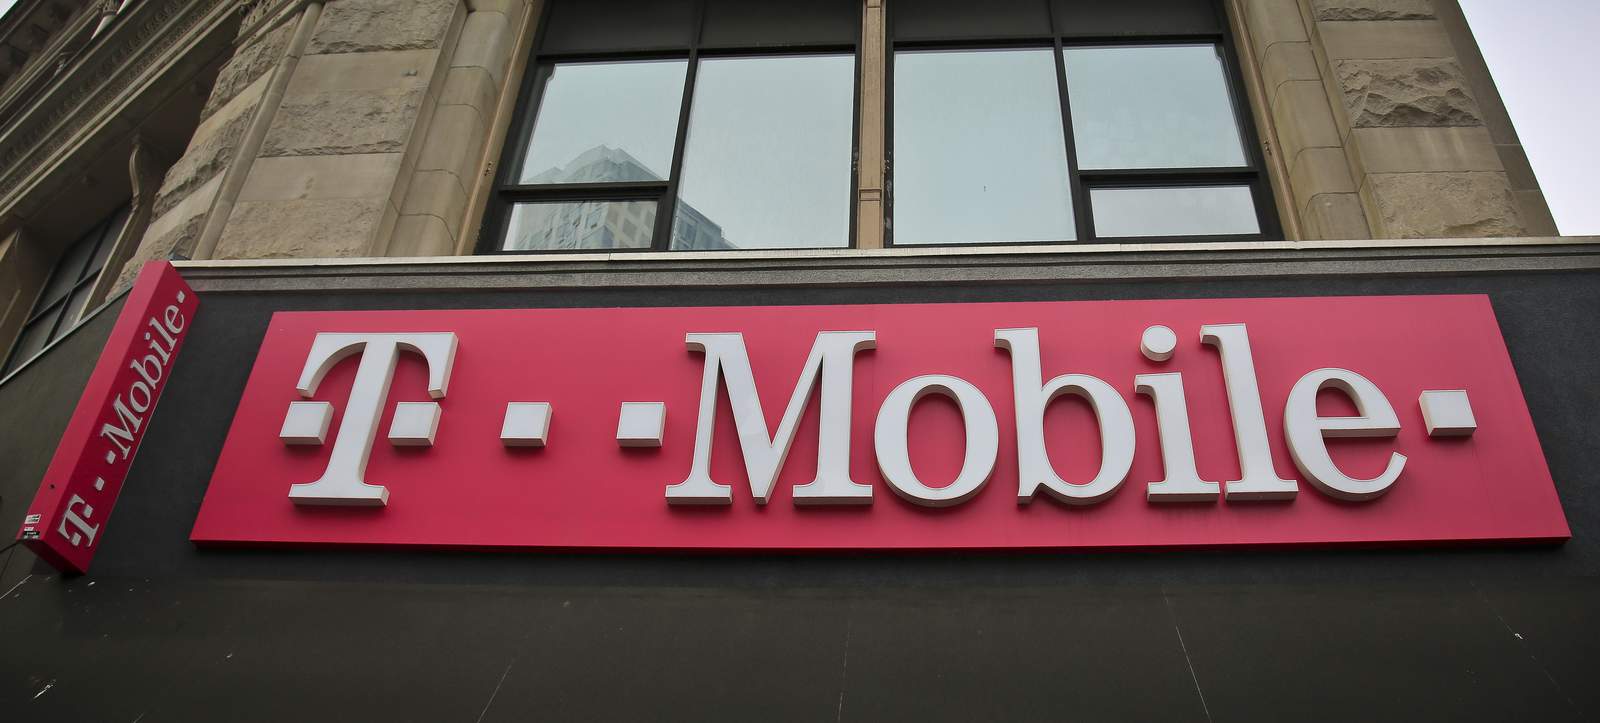 T-Mobile says its working to fix widespread network issues